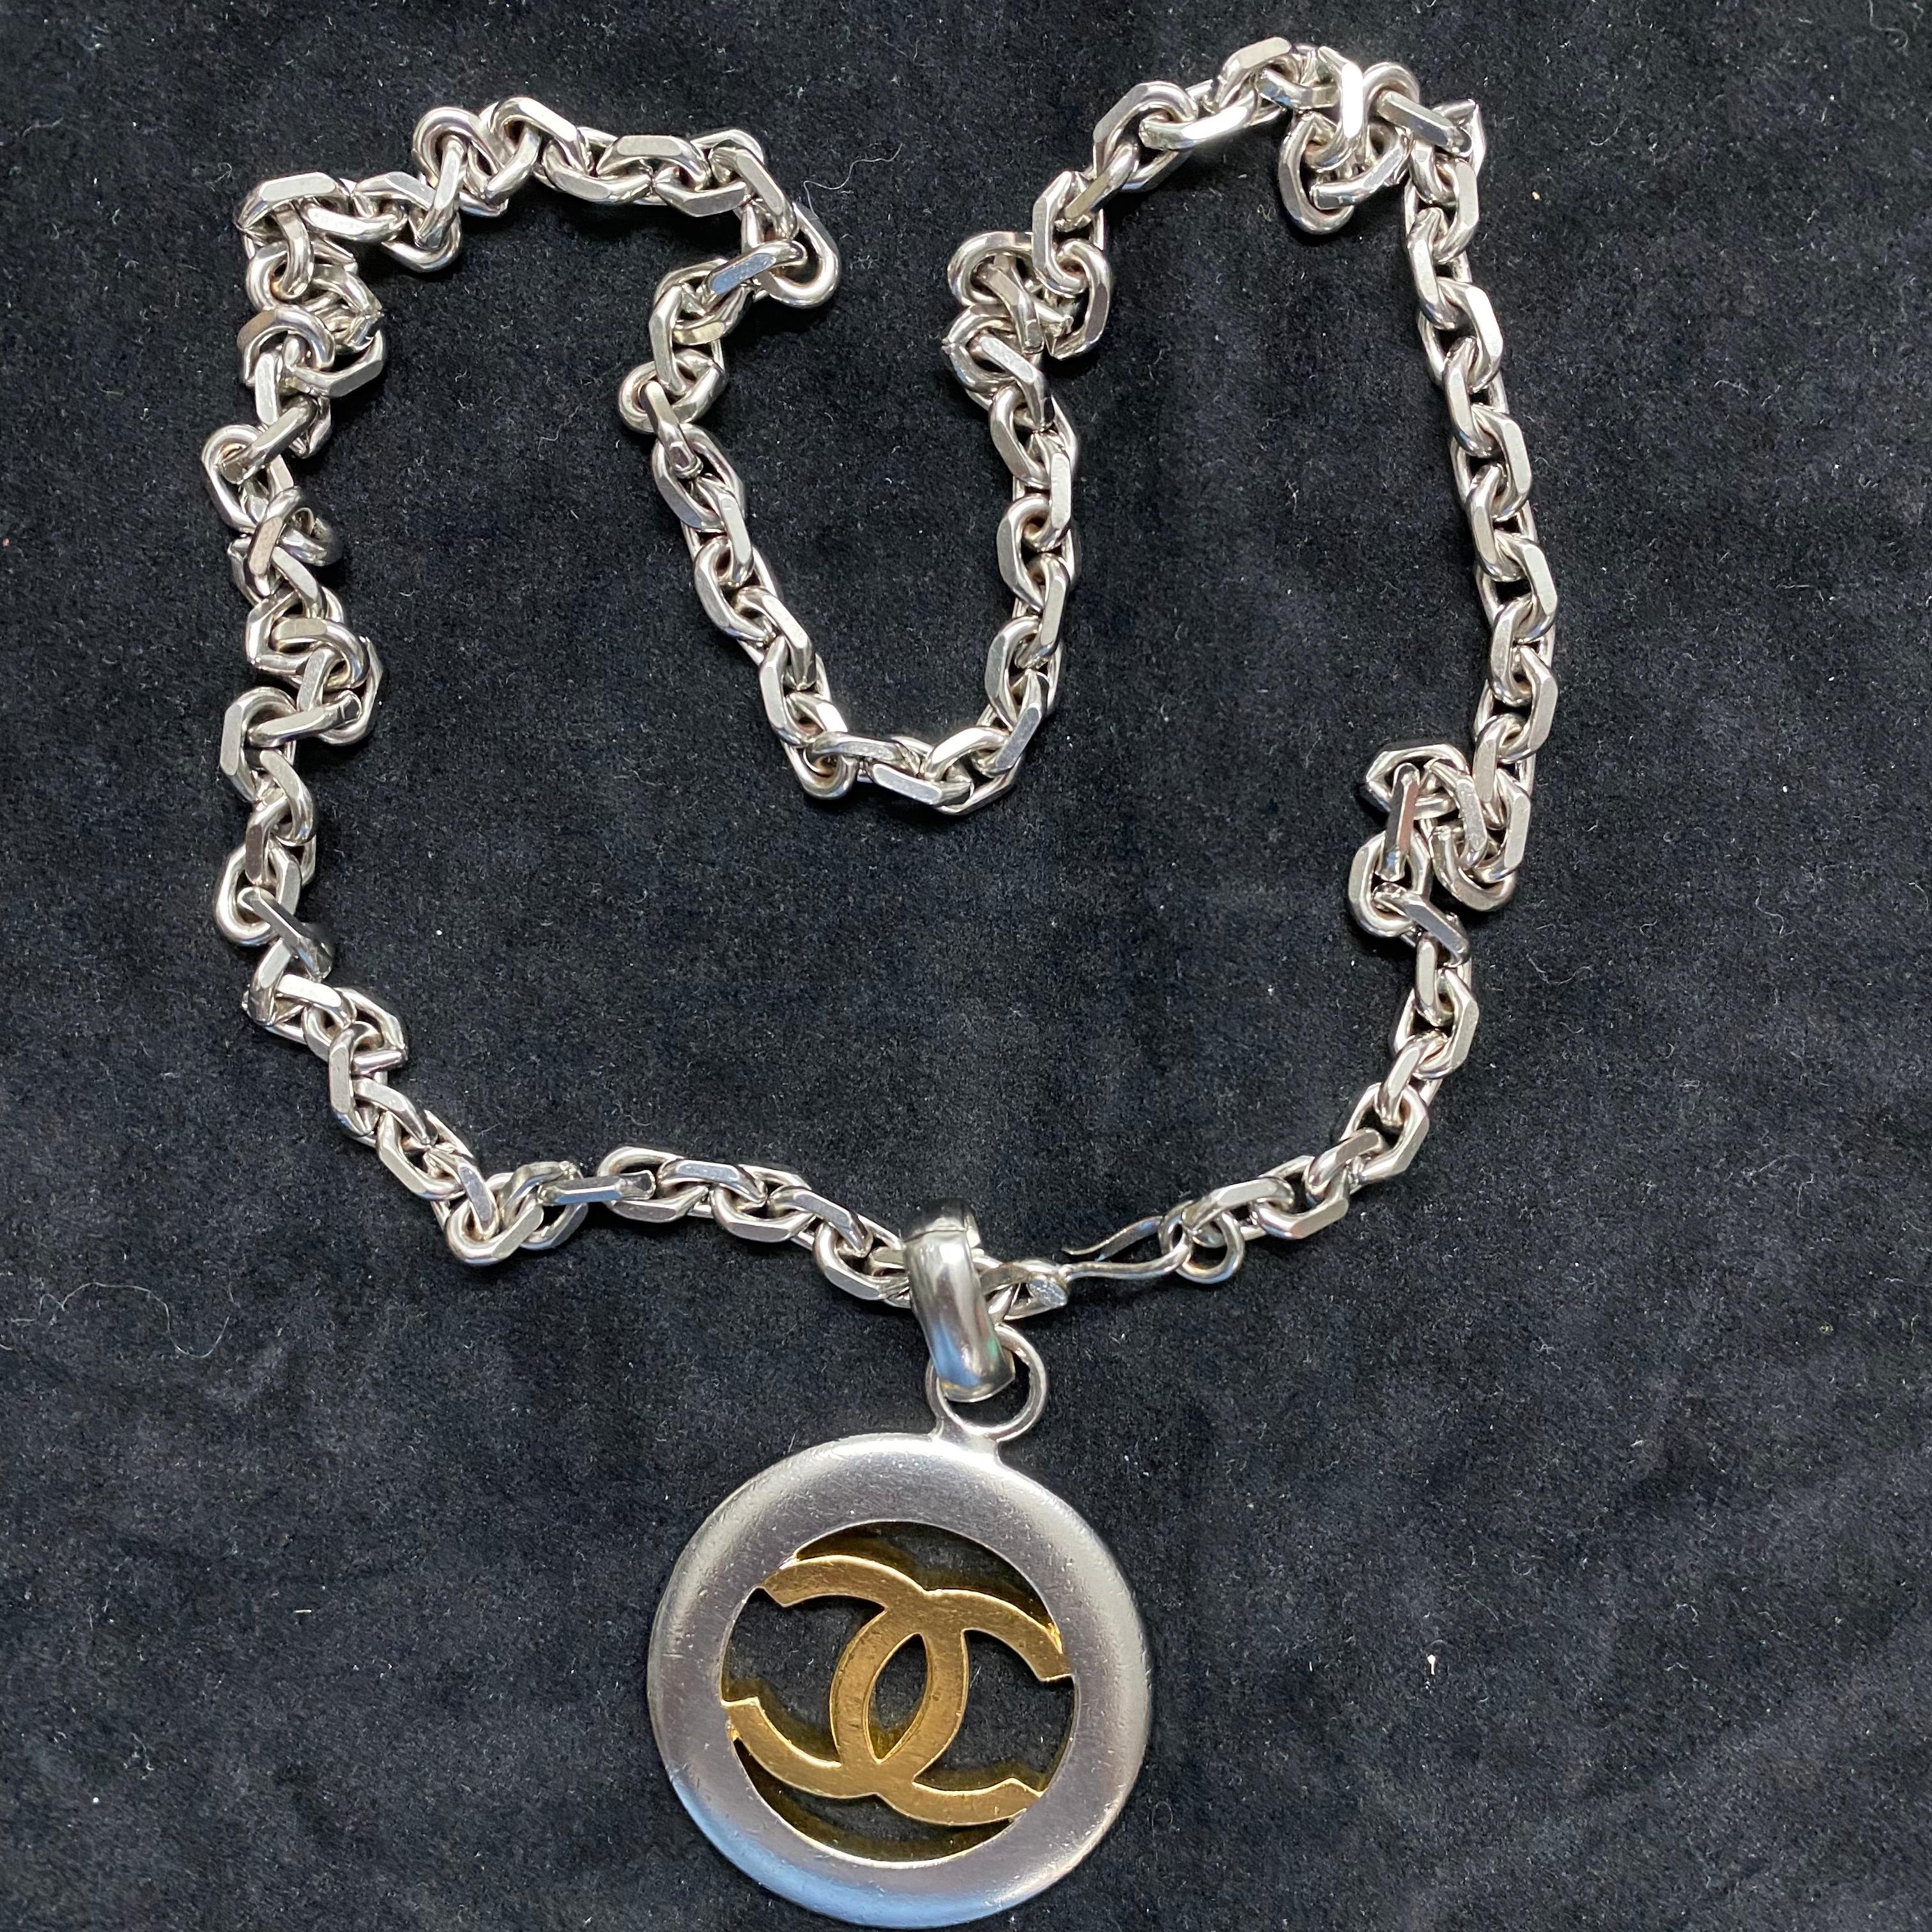 Chanel Vintage -  Necklace with CC pendant in Gold and Silver coated Metal 3